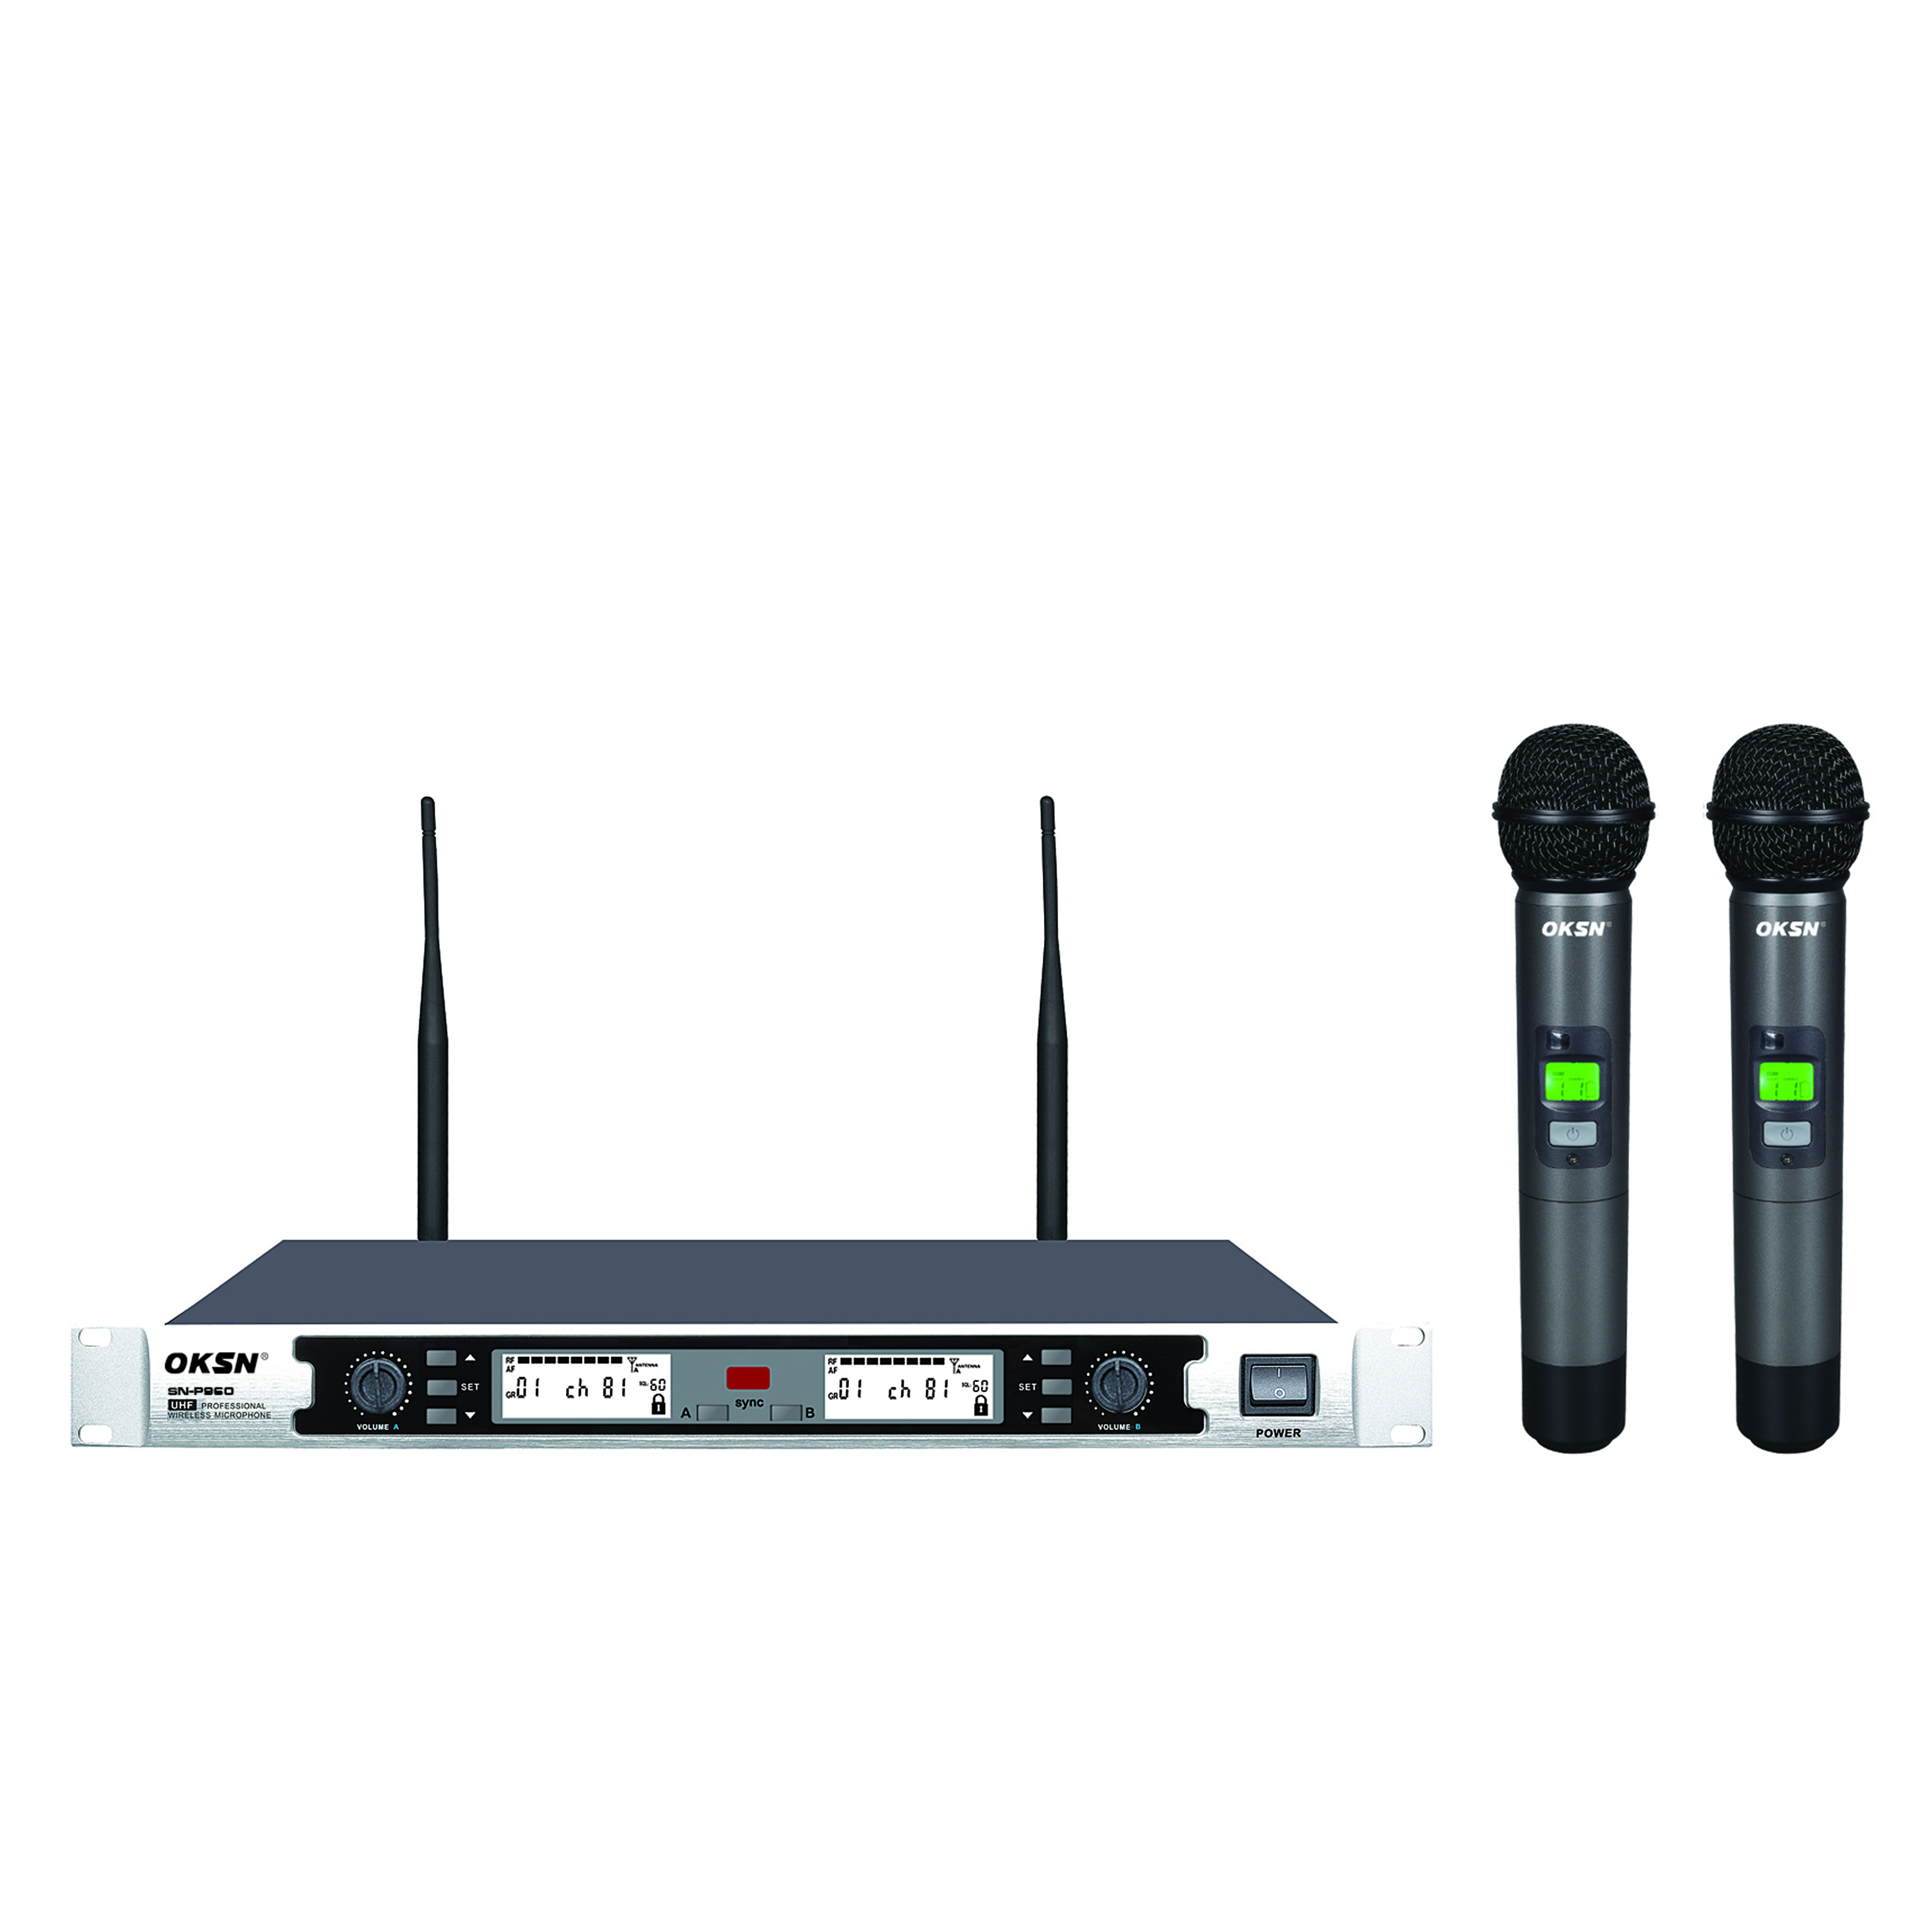 SN-P960 professional UHF wireless microphone for KTV 